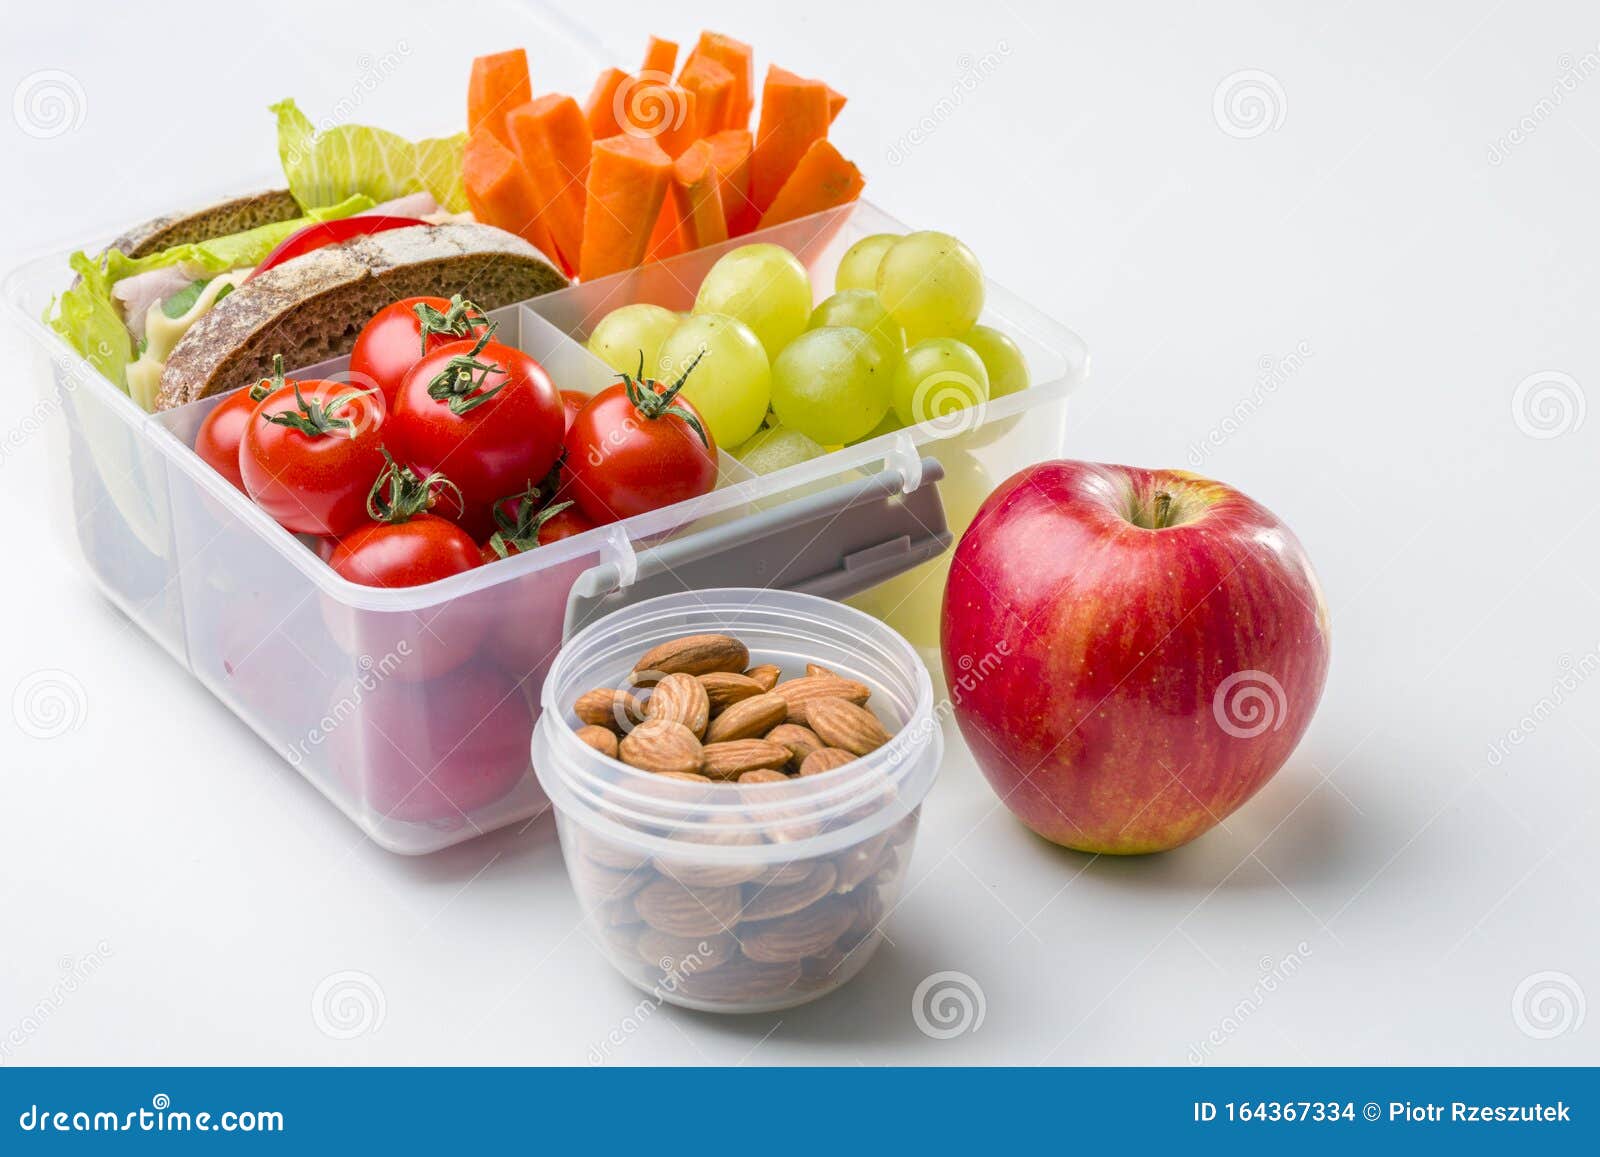 https://thumbs.dreamstime.com/z/lunch-box-fresh-vegetables-fruits-lunch-box-fresh-vegetables-fruits-first-day-school-healty-lifestyle-164367334.jpg